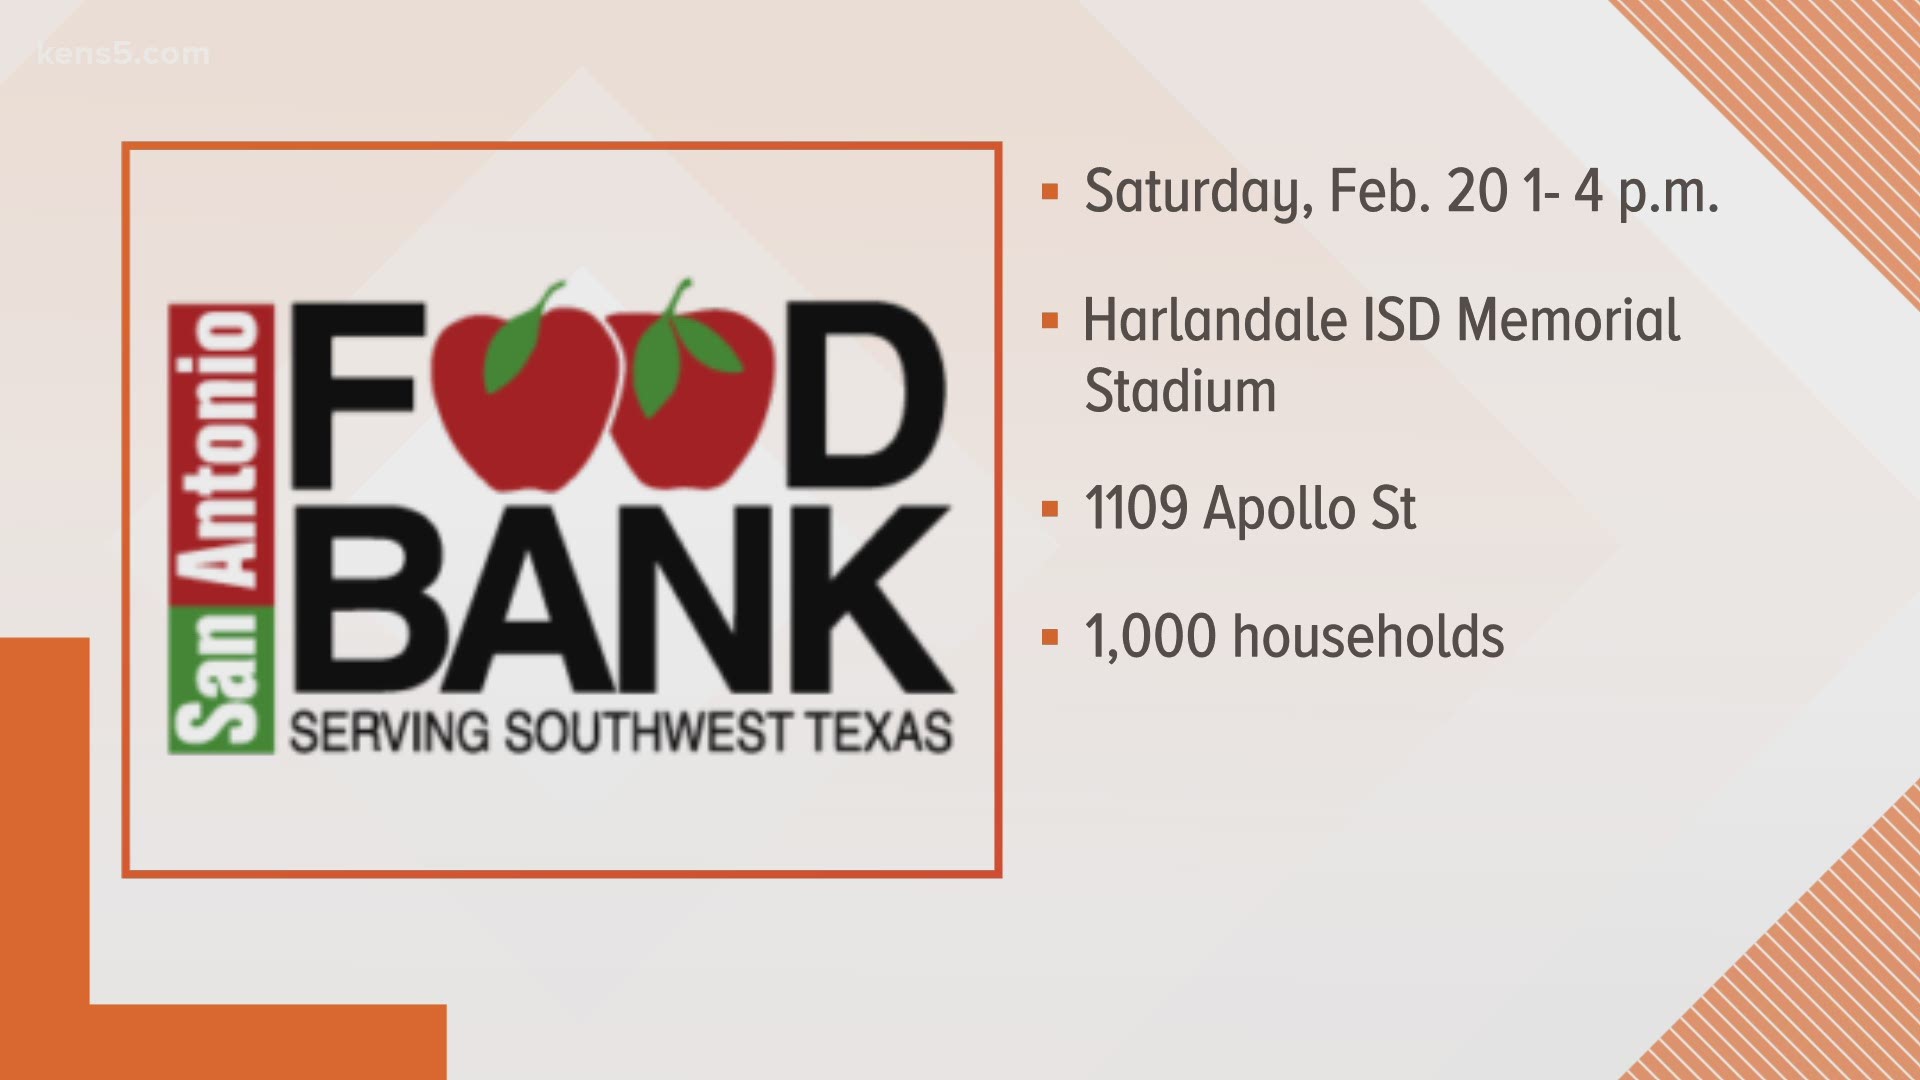 The Food Bank is also needing at least 500 volunteers to help distribute food, water.